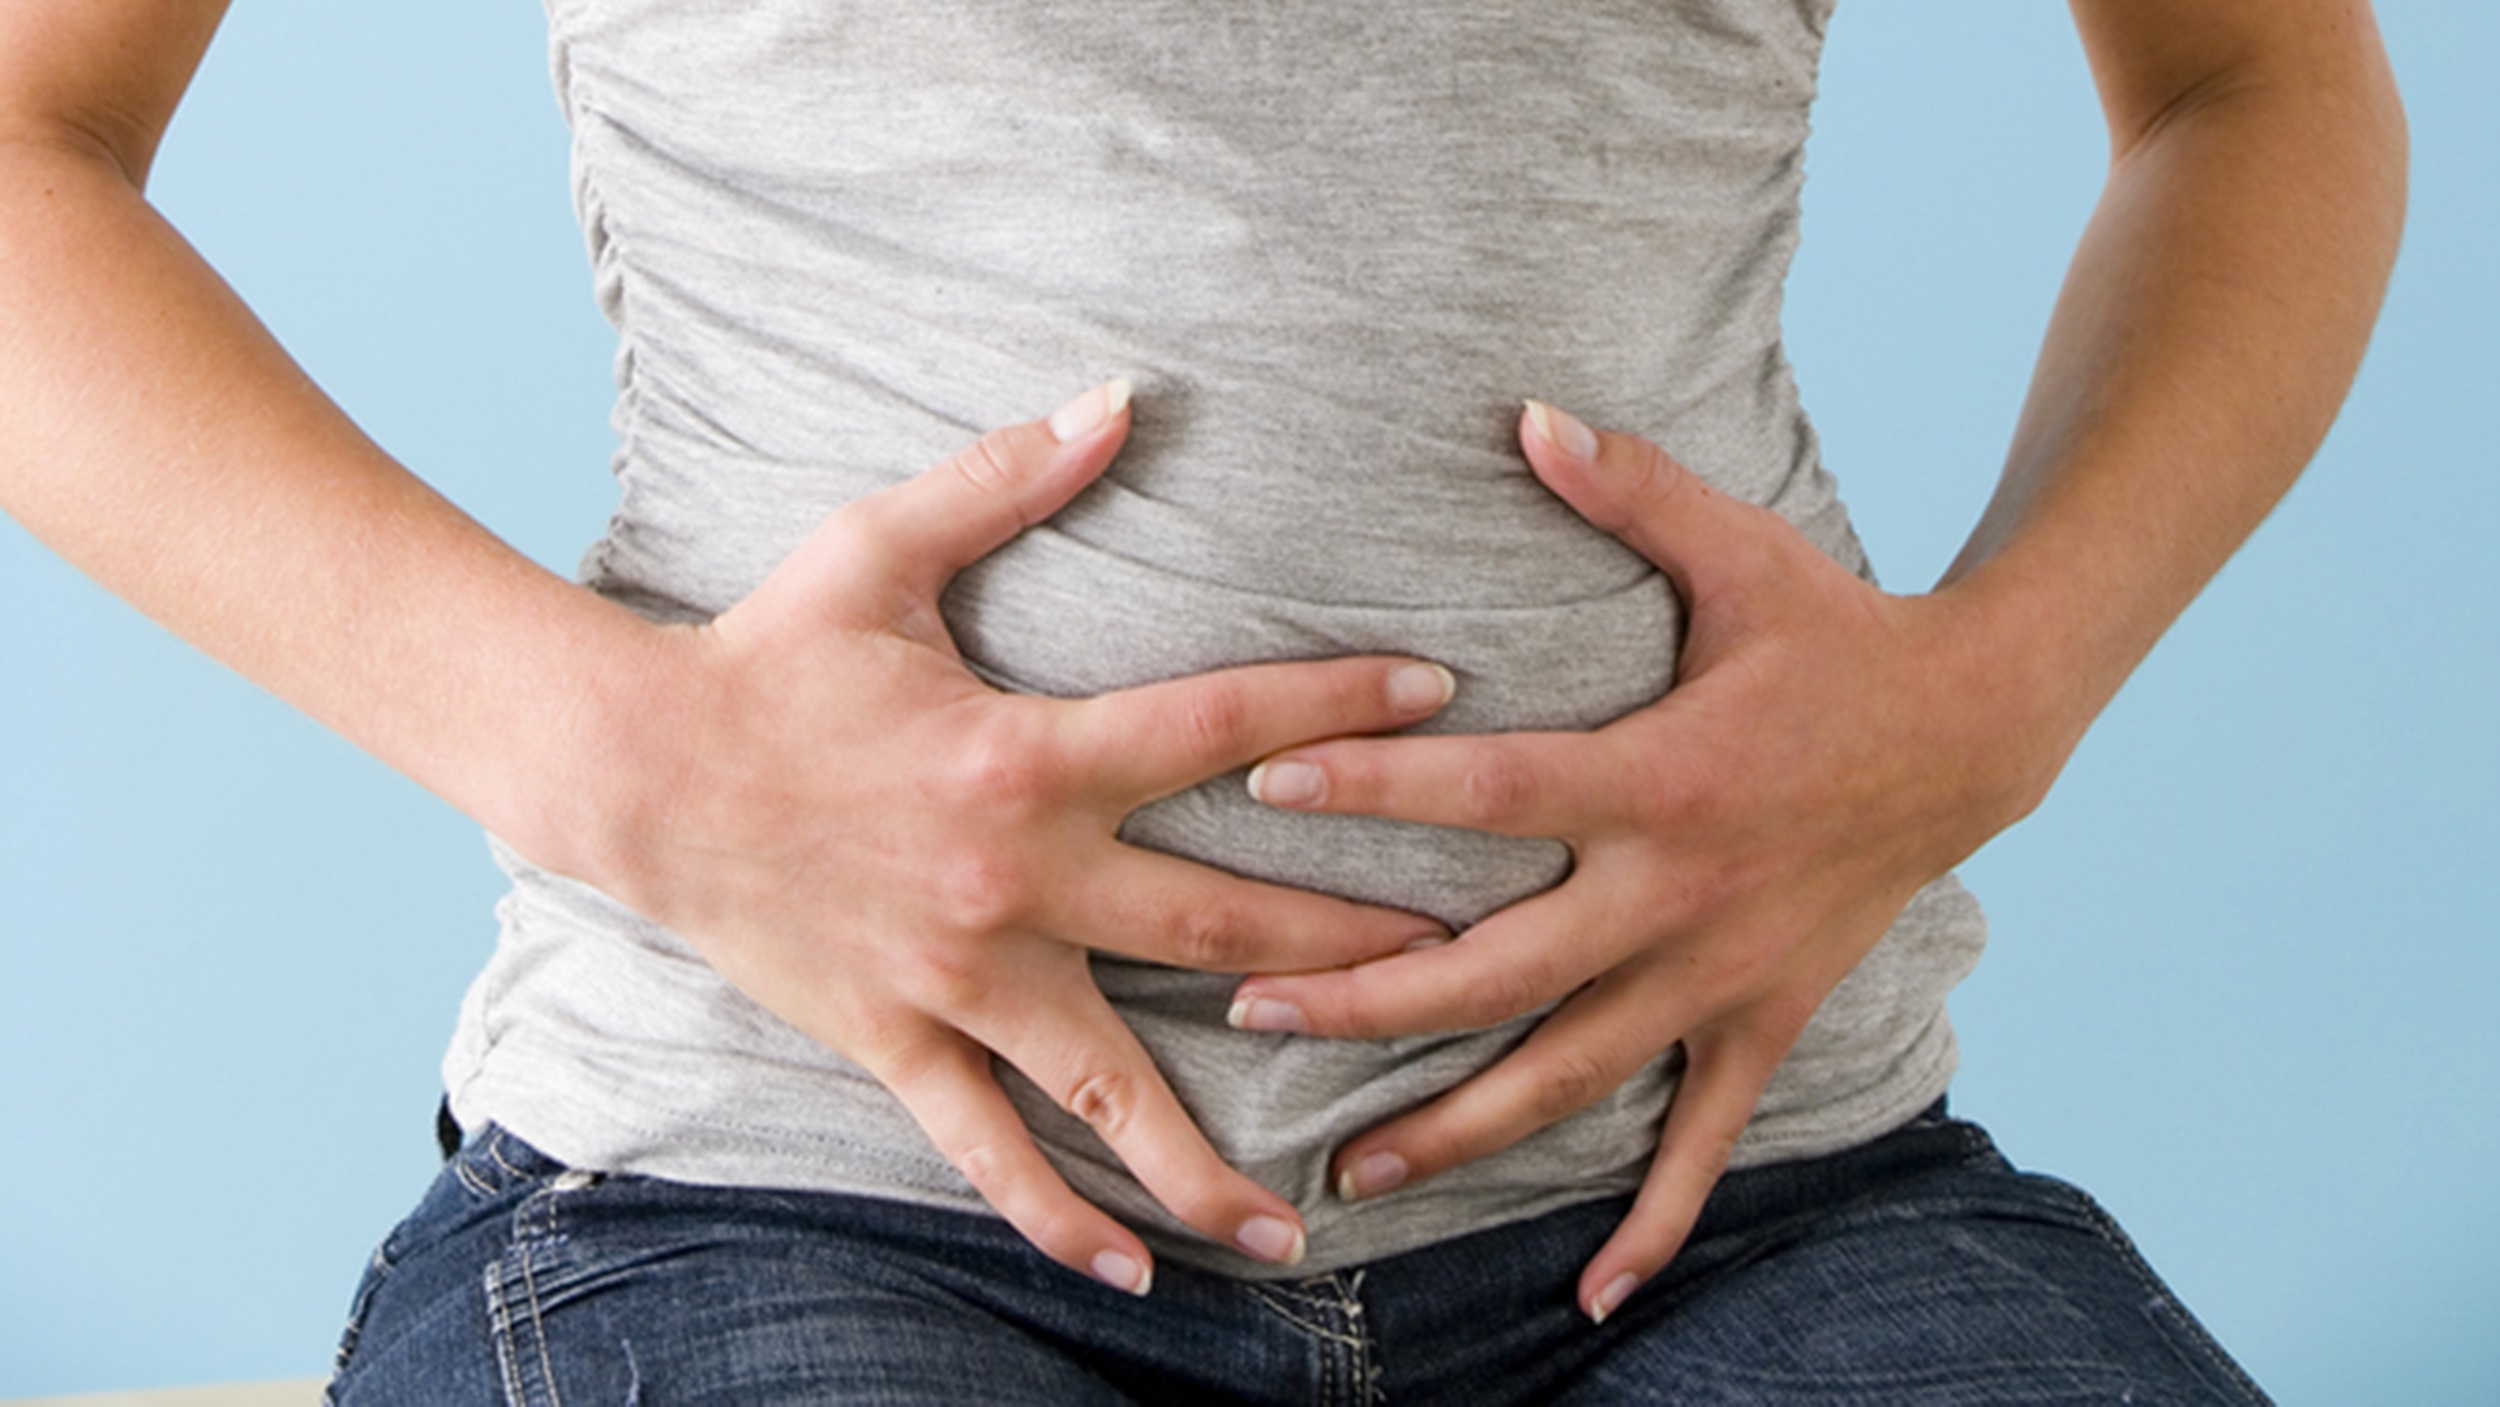 The Pain of Constipation and Frustration: How to Treat?